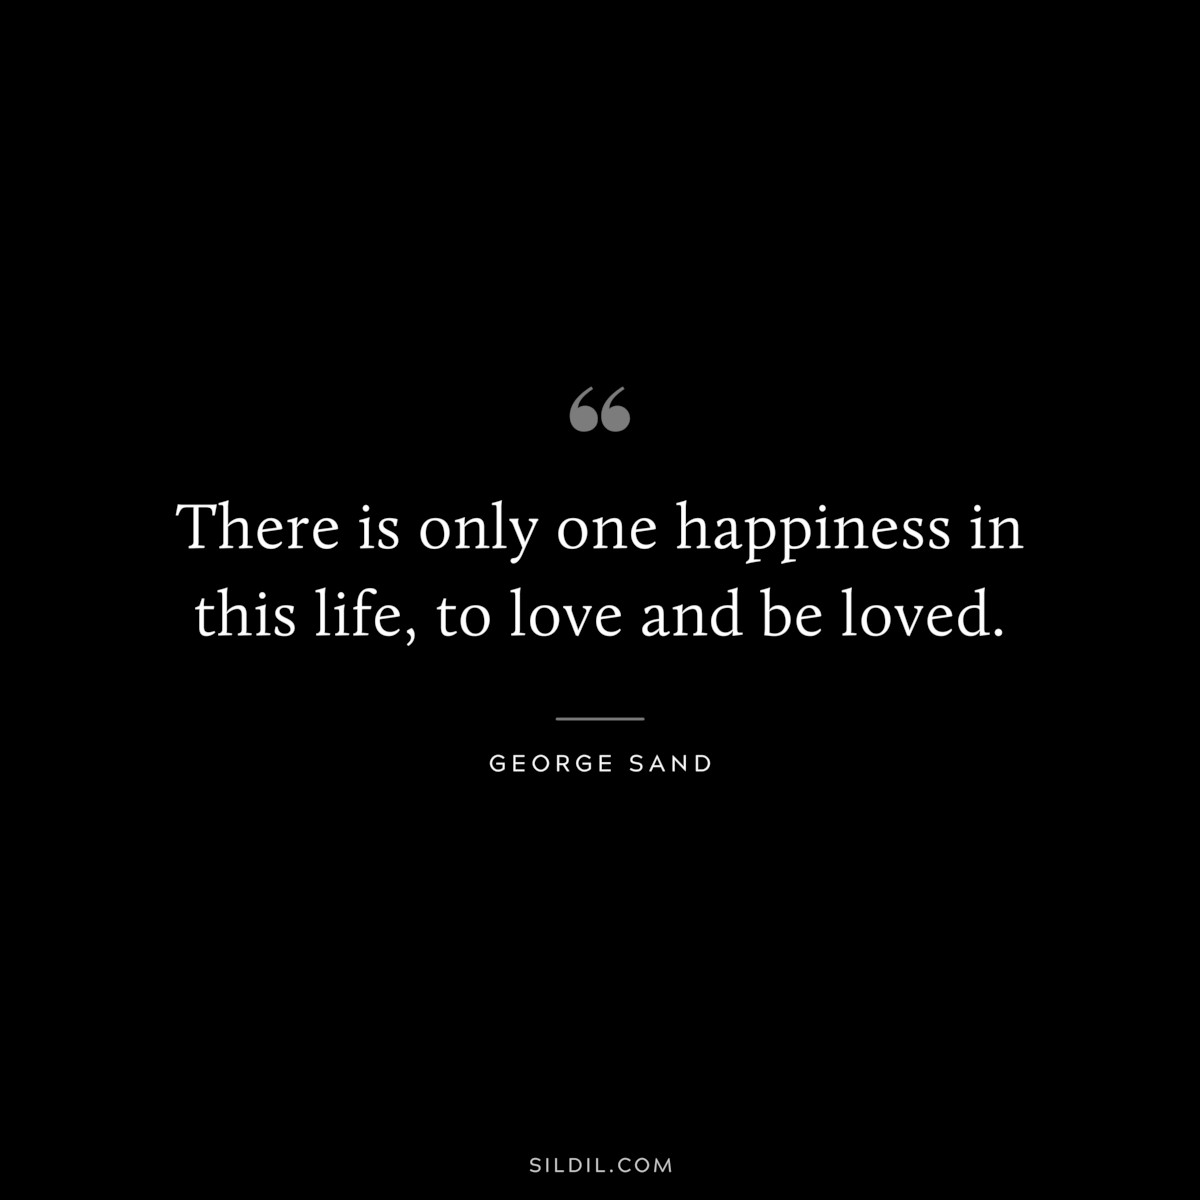 There is only one happiness in this life, to love and be loved. ― George Sand